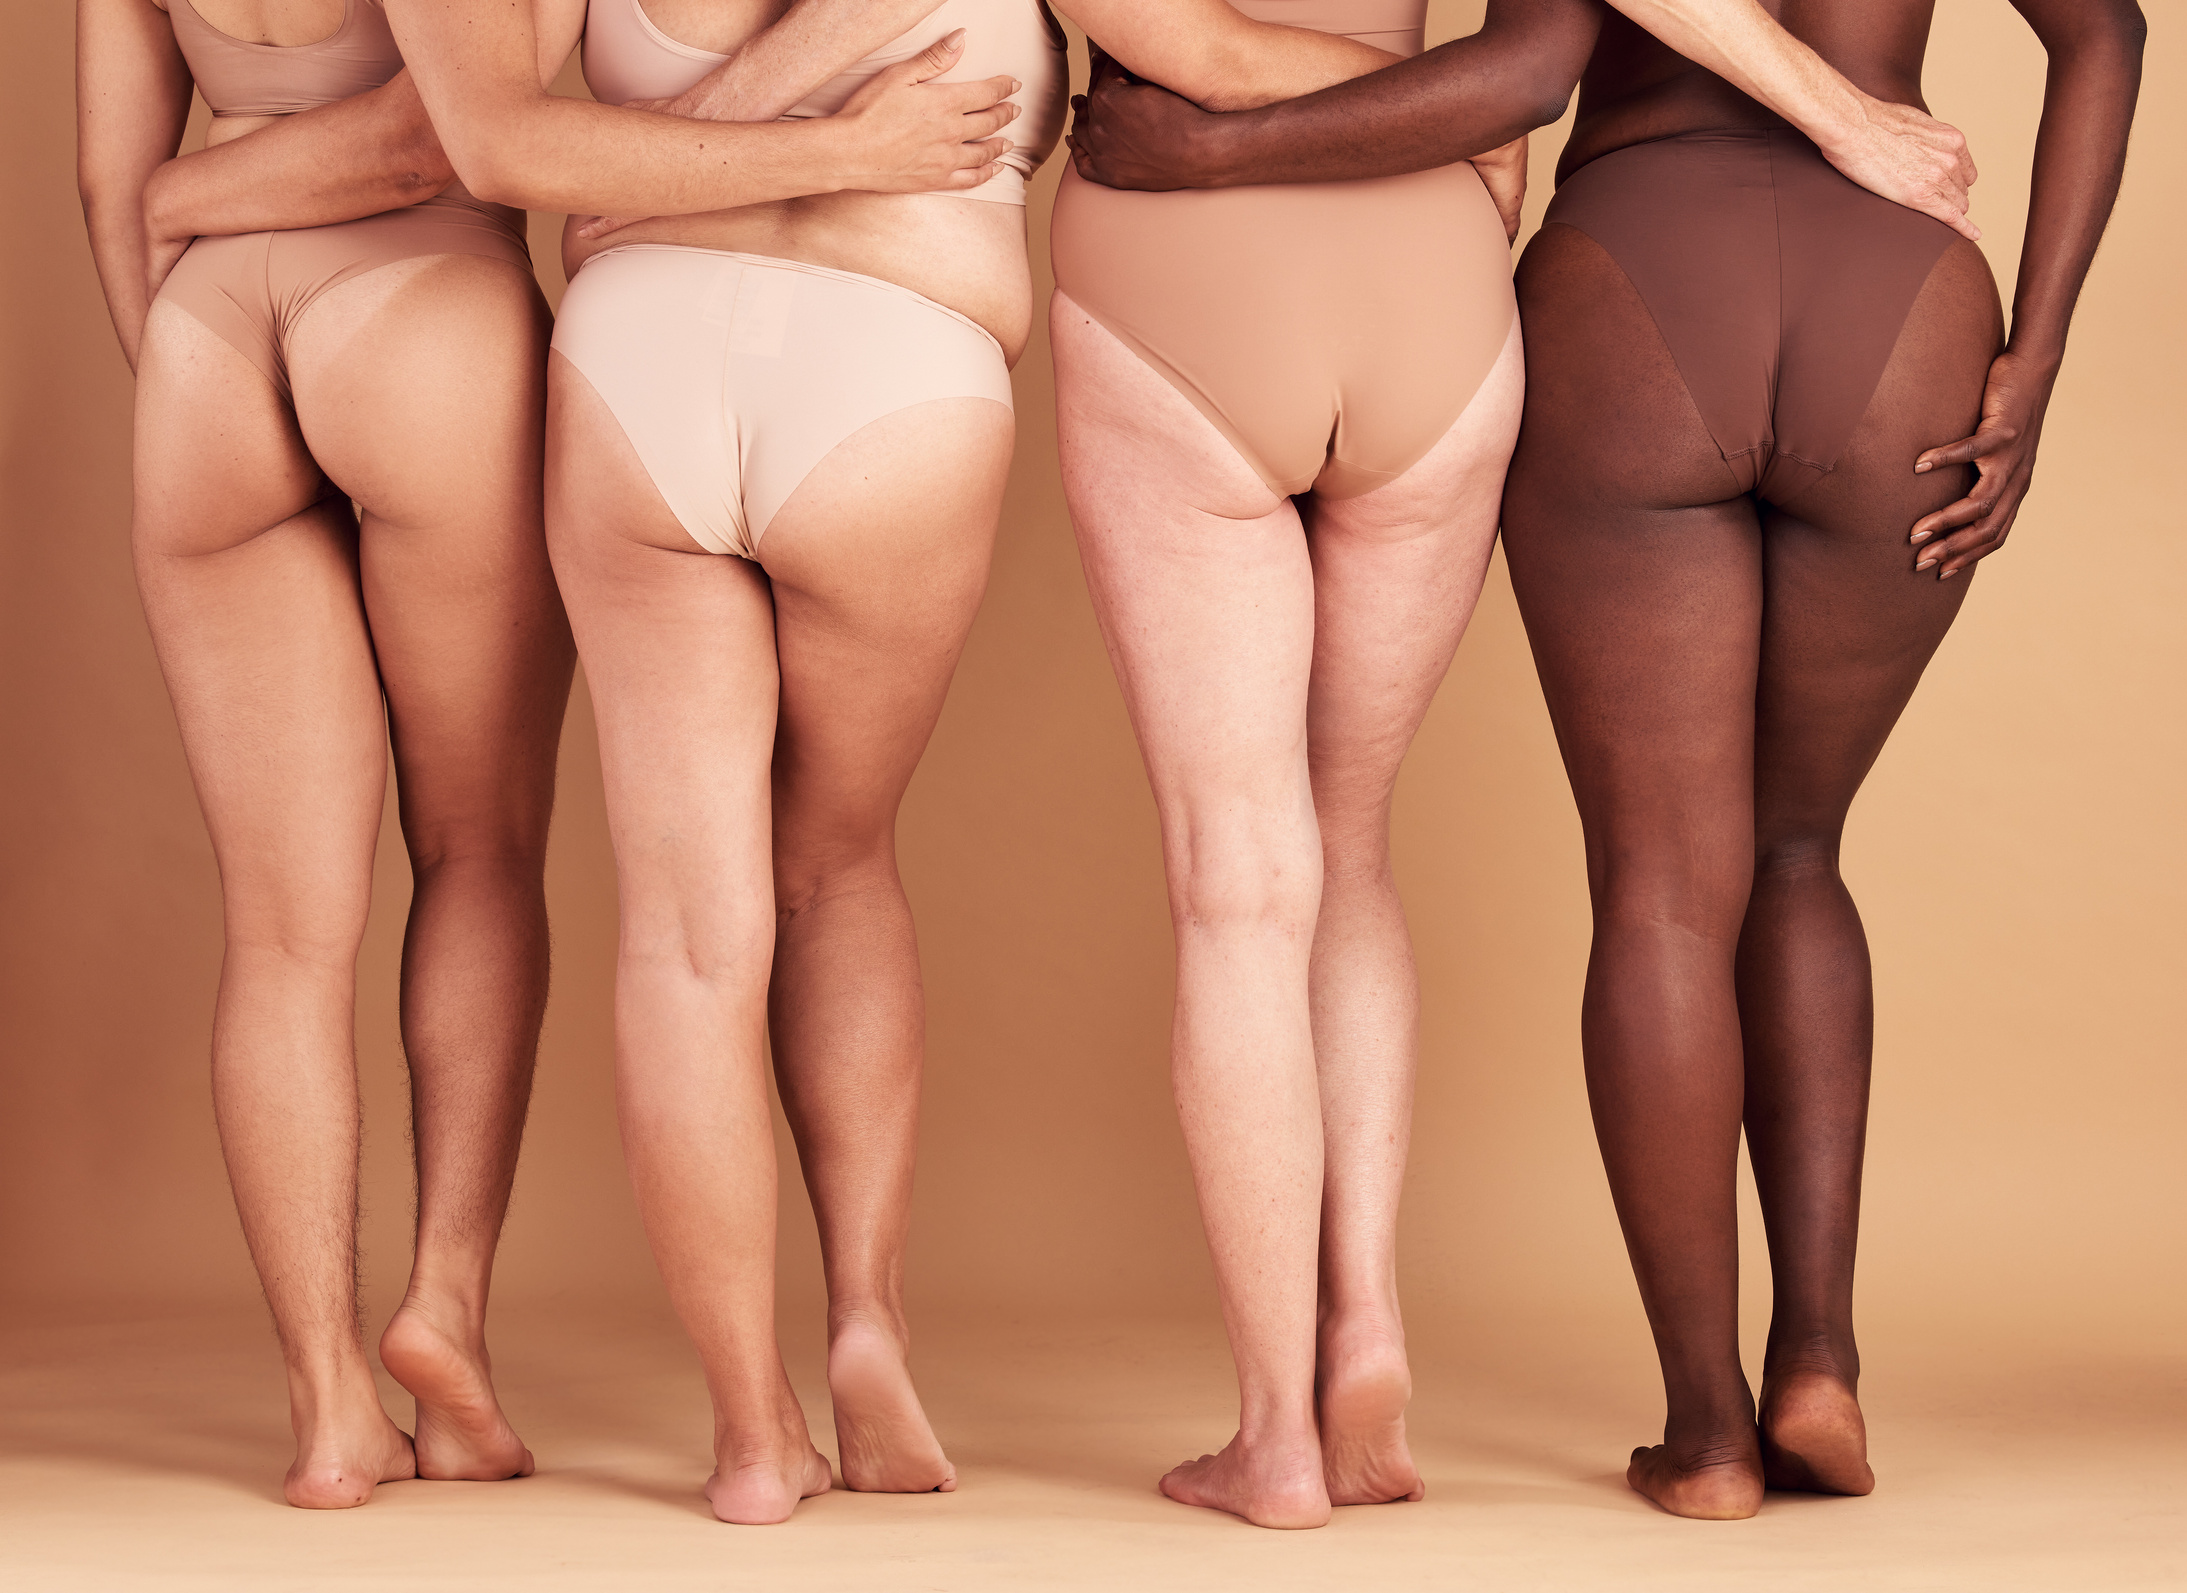 Women Group, Lingerie and Butt in Studio for Wellness, Fashion and Diversity with plus Size in Unity. Back,  and Woman Model Team with Solidarity, Body Positive or Health for Beauty by Background